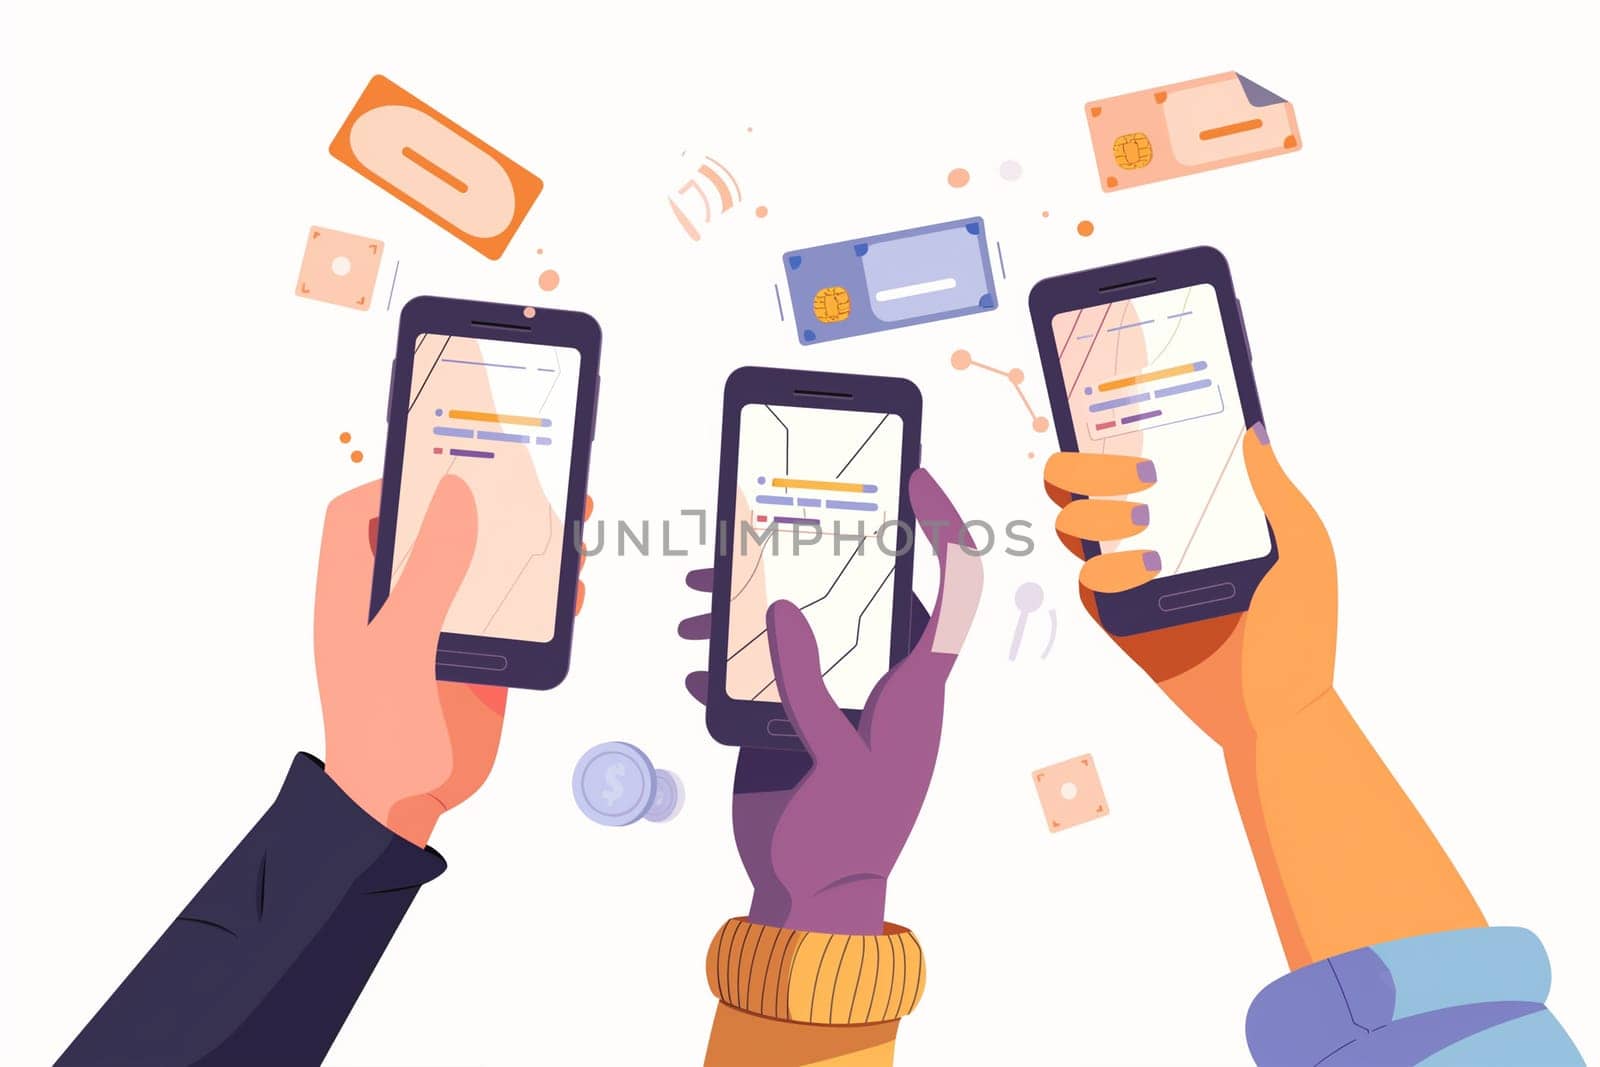 Digital Financial Transactions Between Mobile Users Represented in an Illustrated Artwork by Sd28DimoN_1976